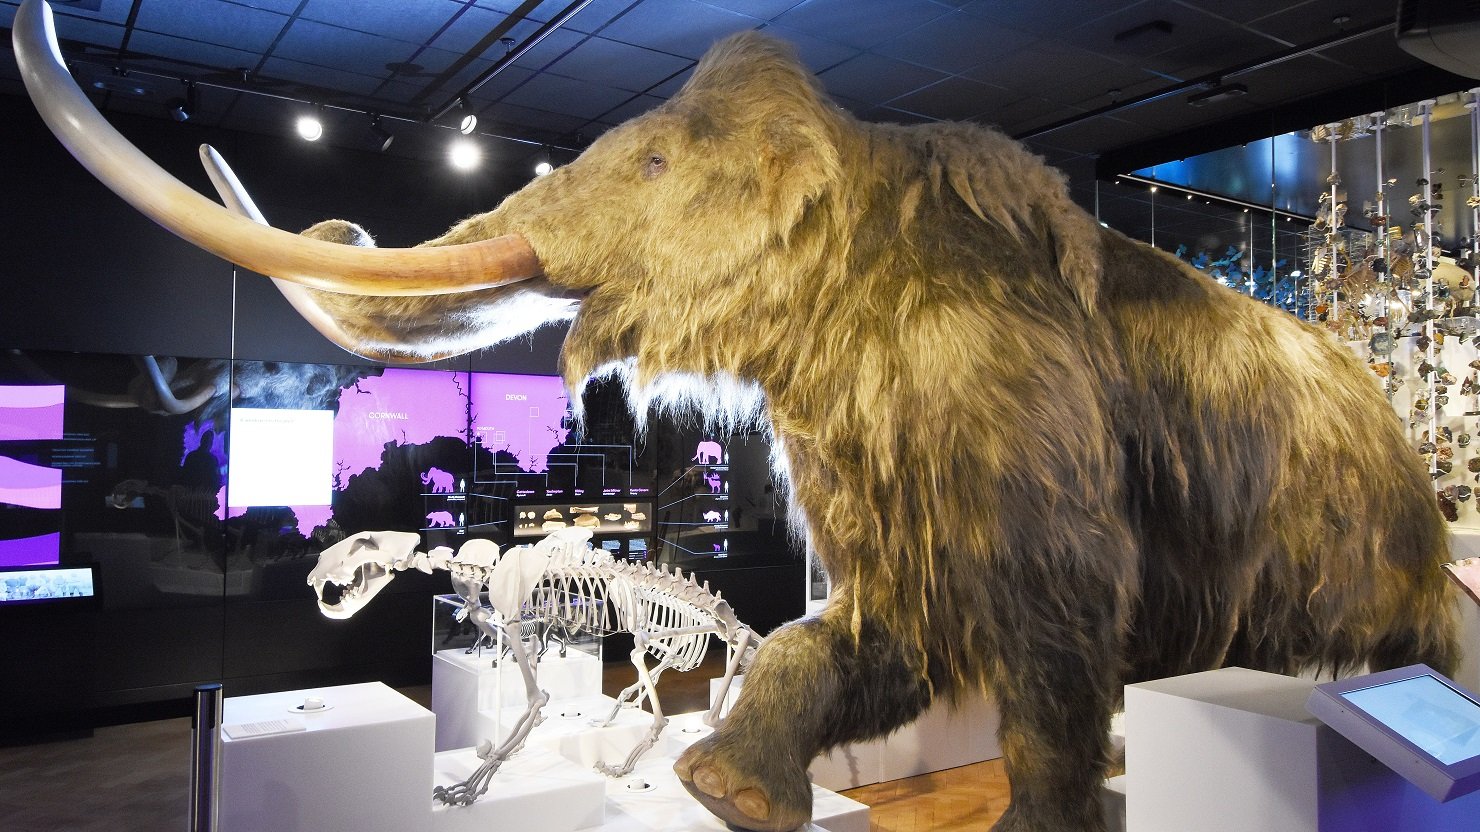 Woolly mammoth and cave lion in a museum